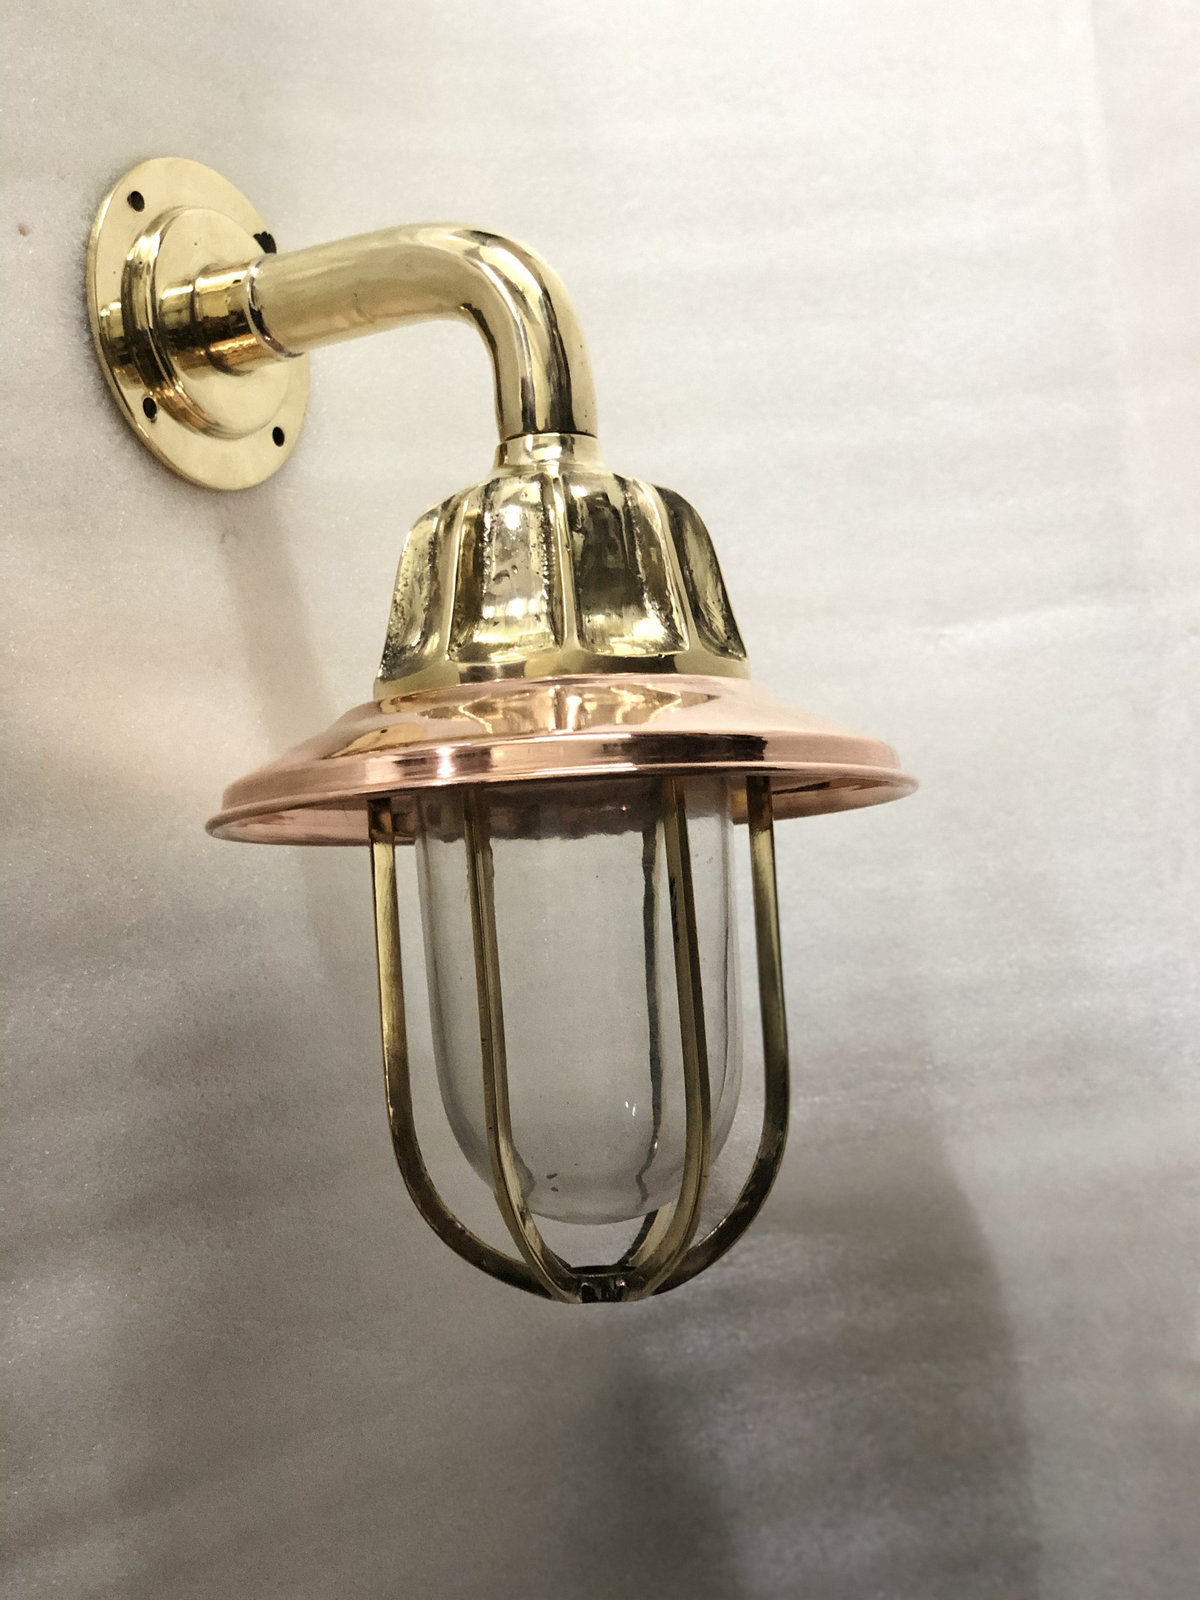 Nautical House Styling Custom Design Brass Ship Wall Light with Copper Shade